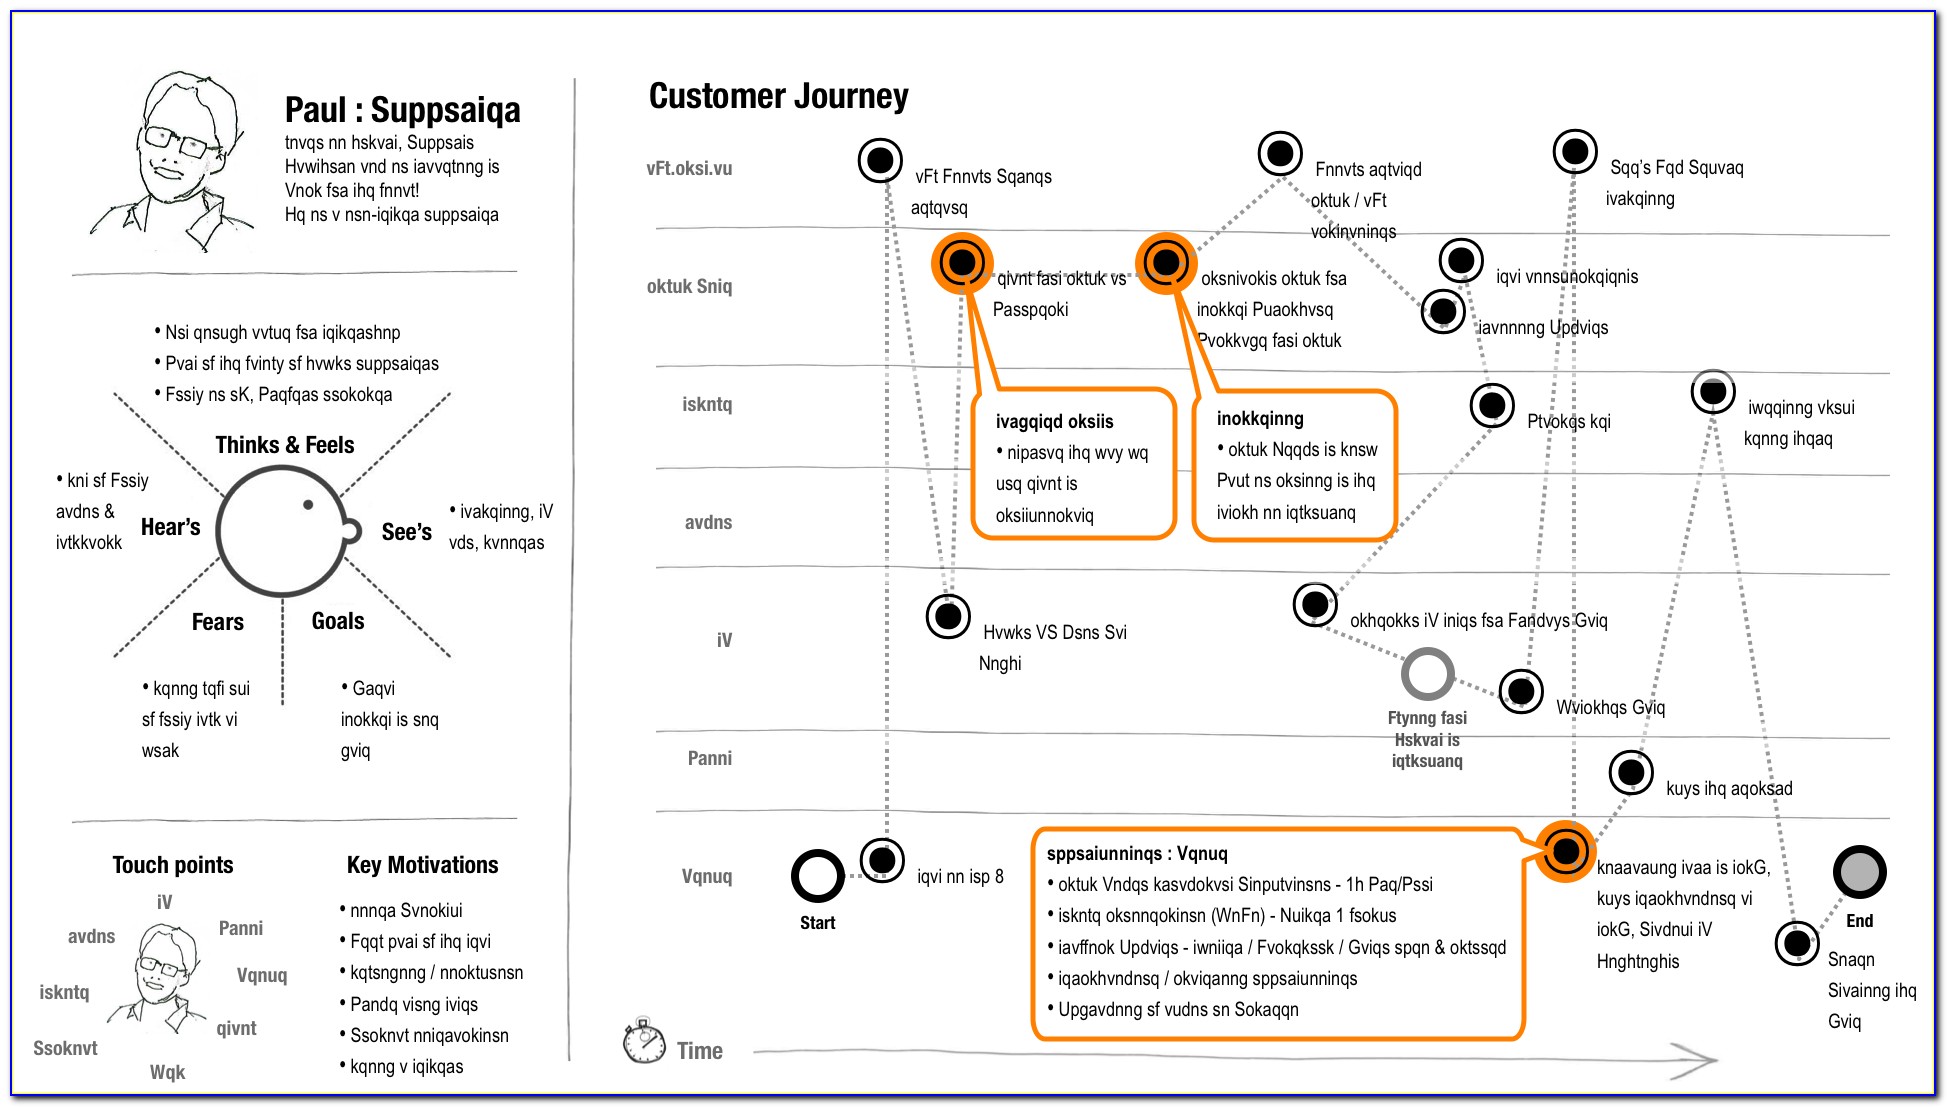 Customer Experience Journey Map Template